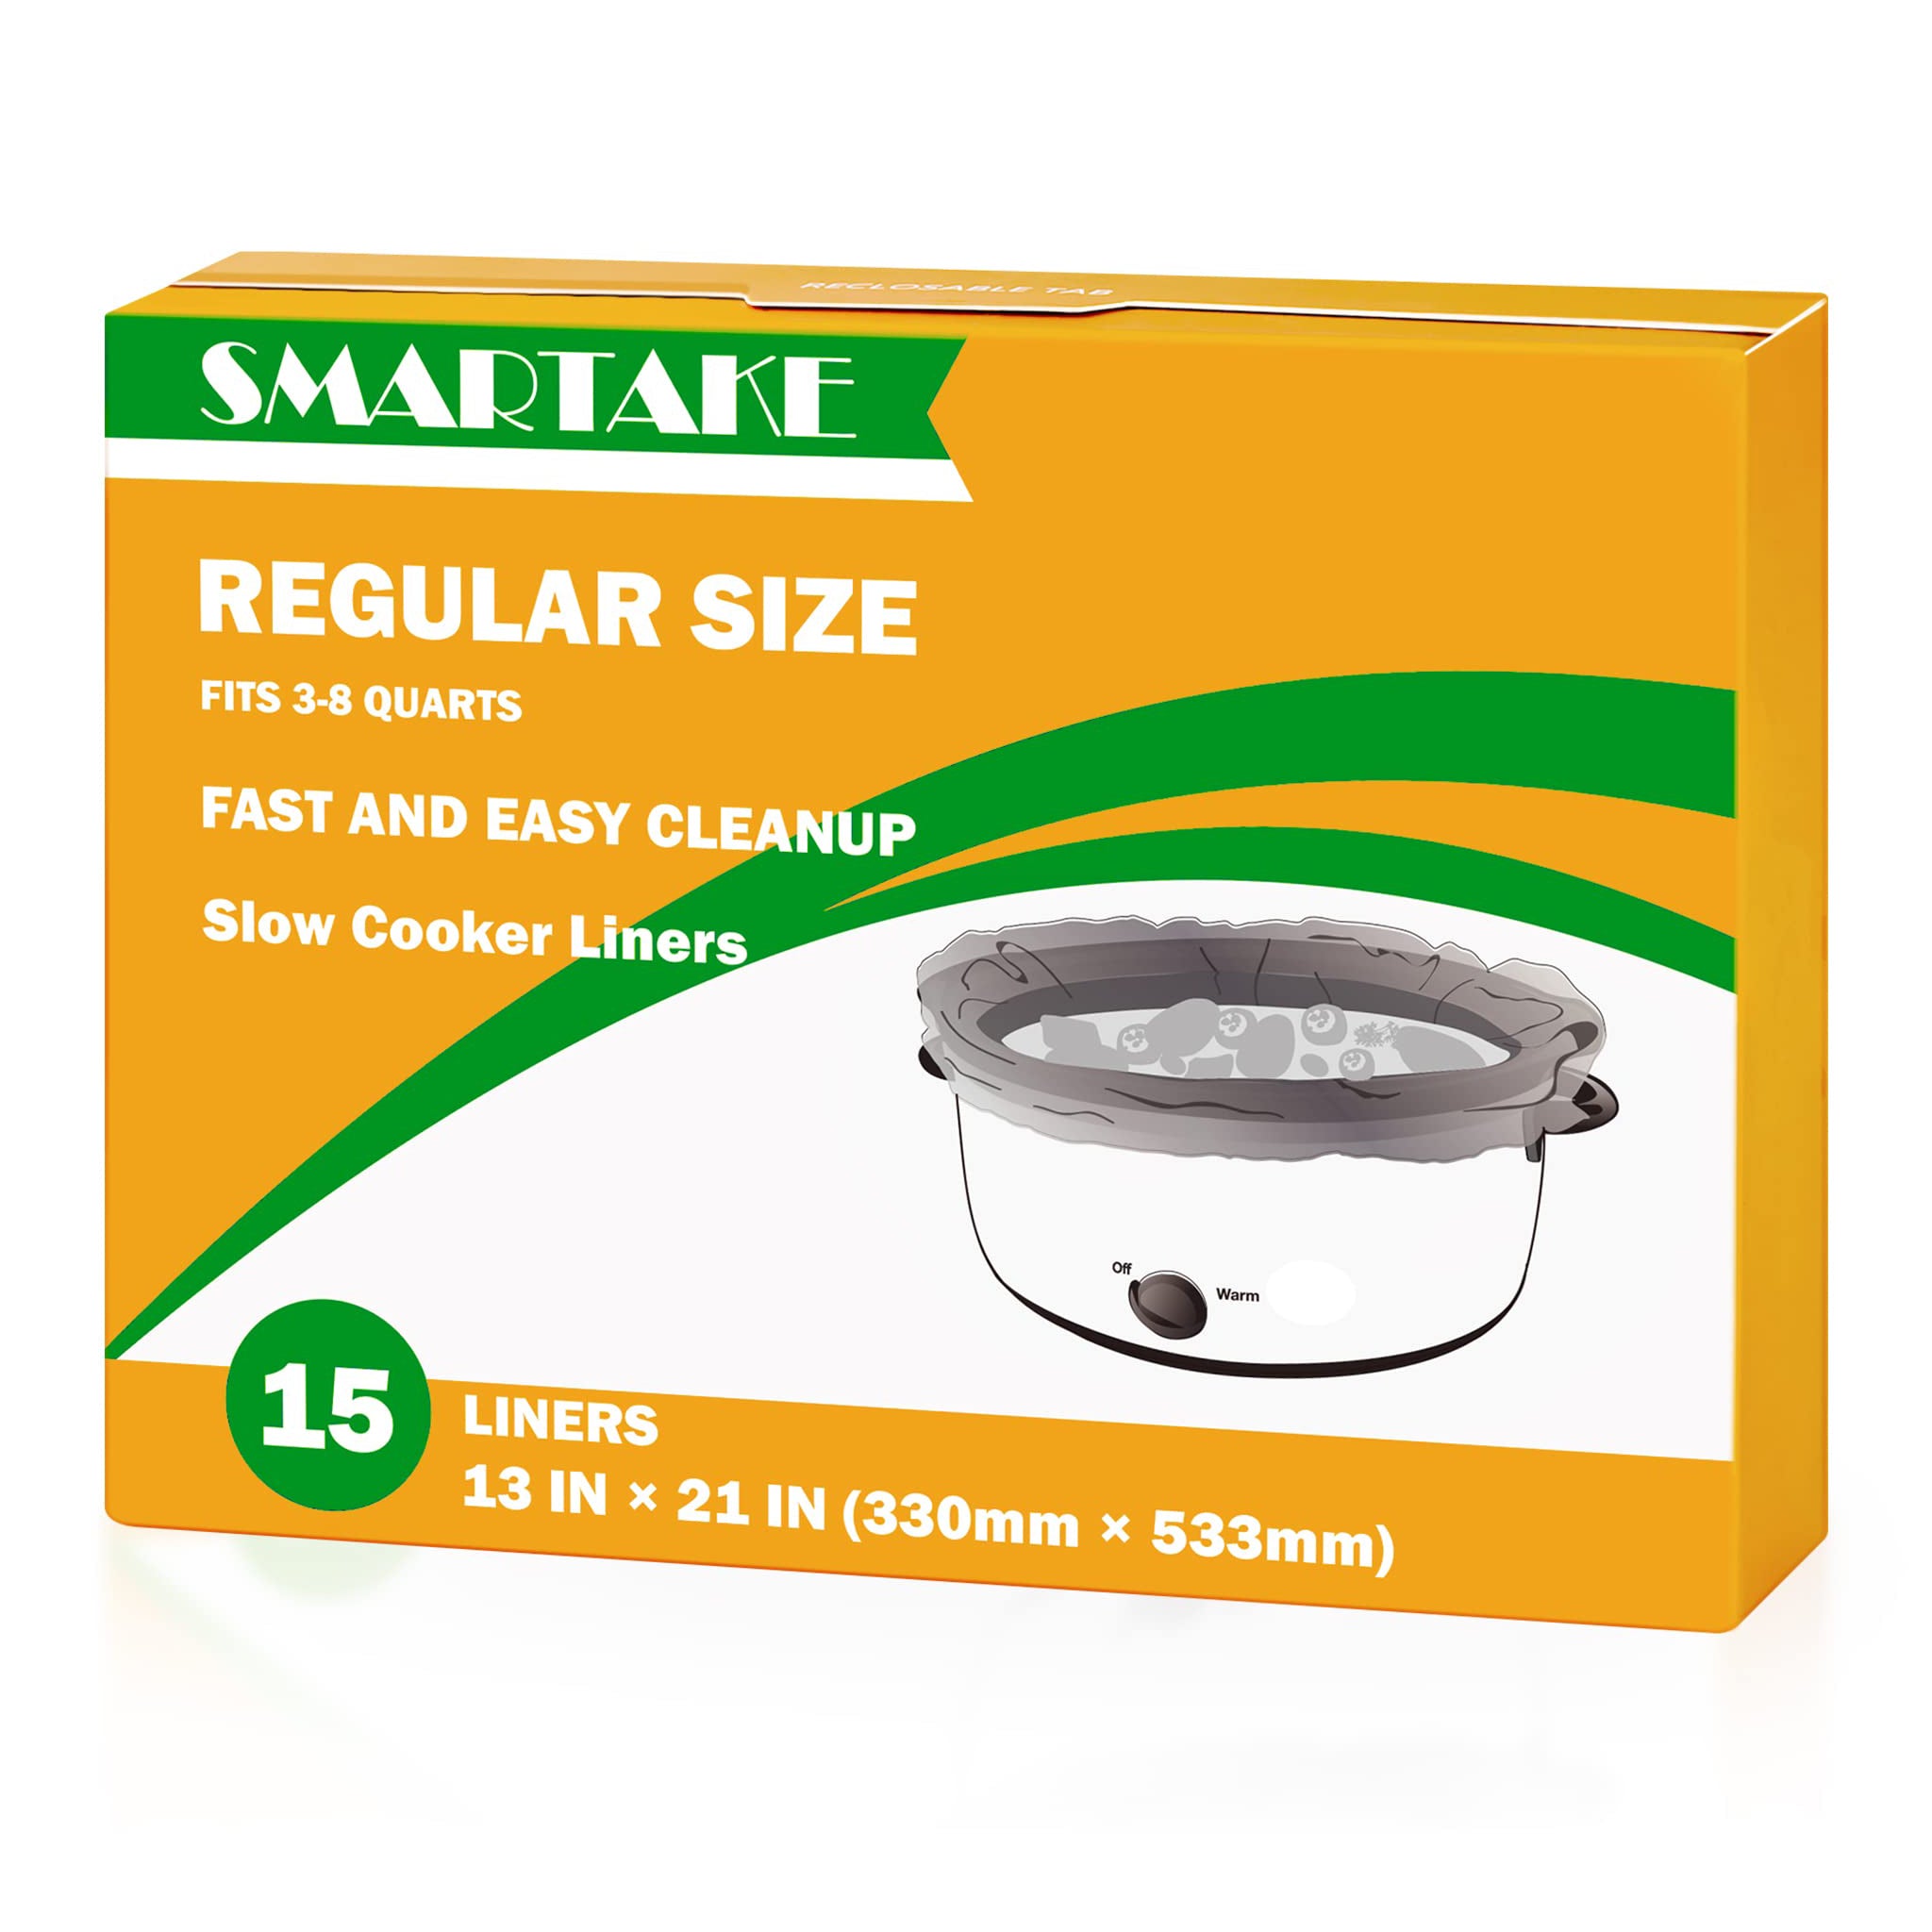 OOFLAYE RNAB0B7G8XSBN 32 bags slow cooker liners, disposable multi